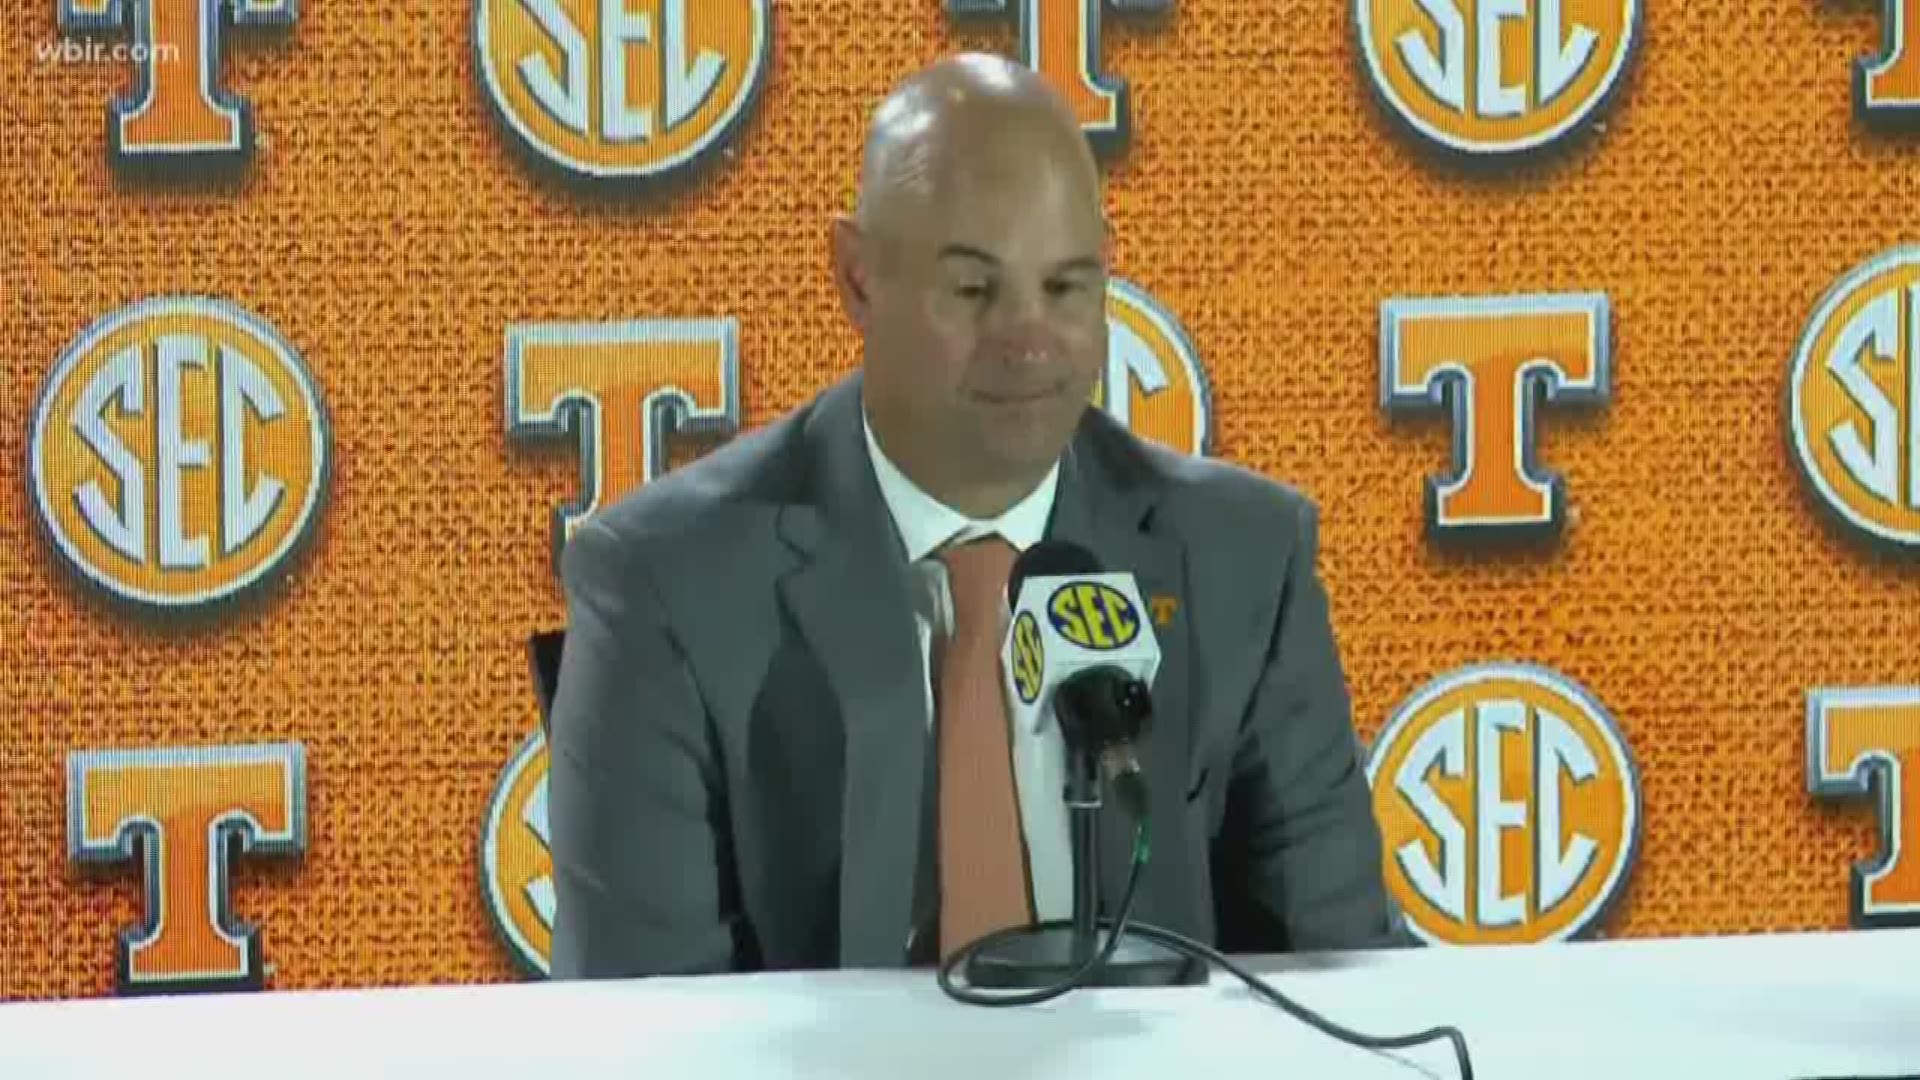 He spoke to reporters at SEC Media Days this morning. His overwhelming message is that he's ready to get started.